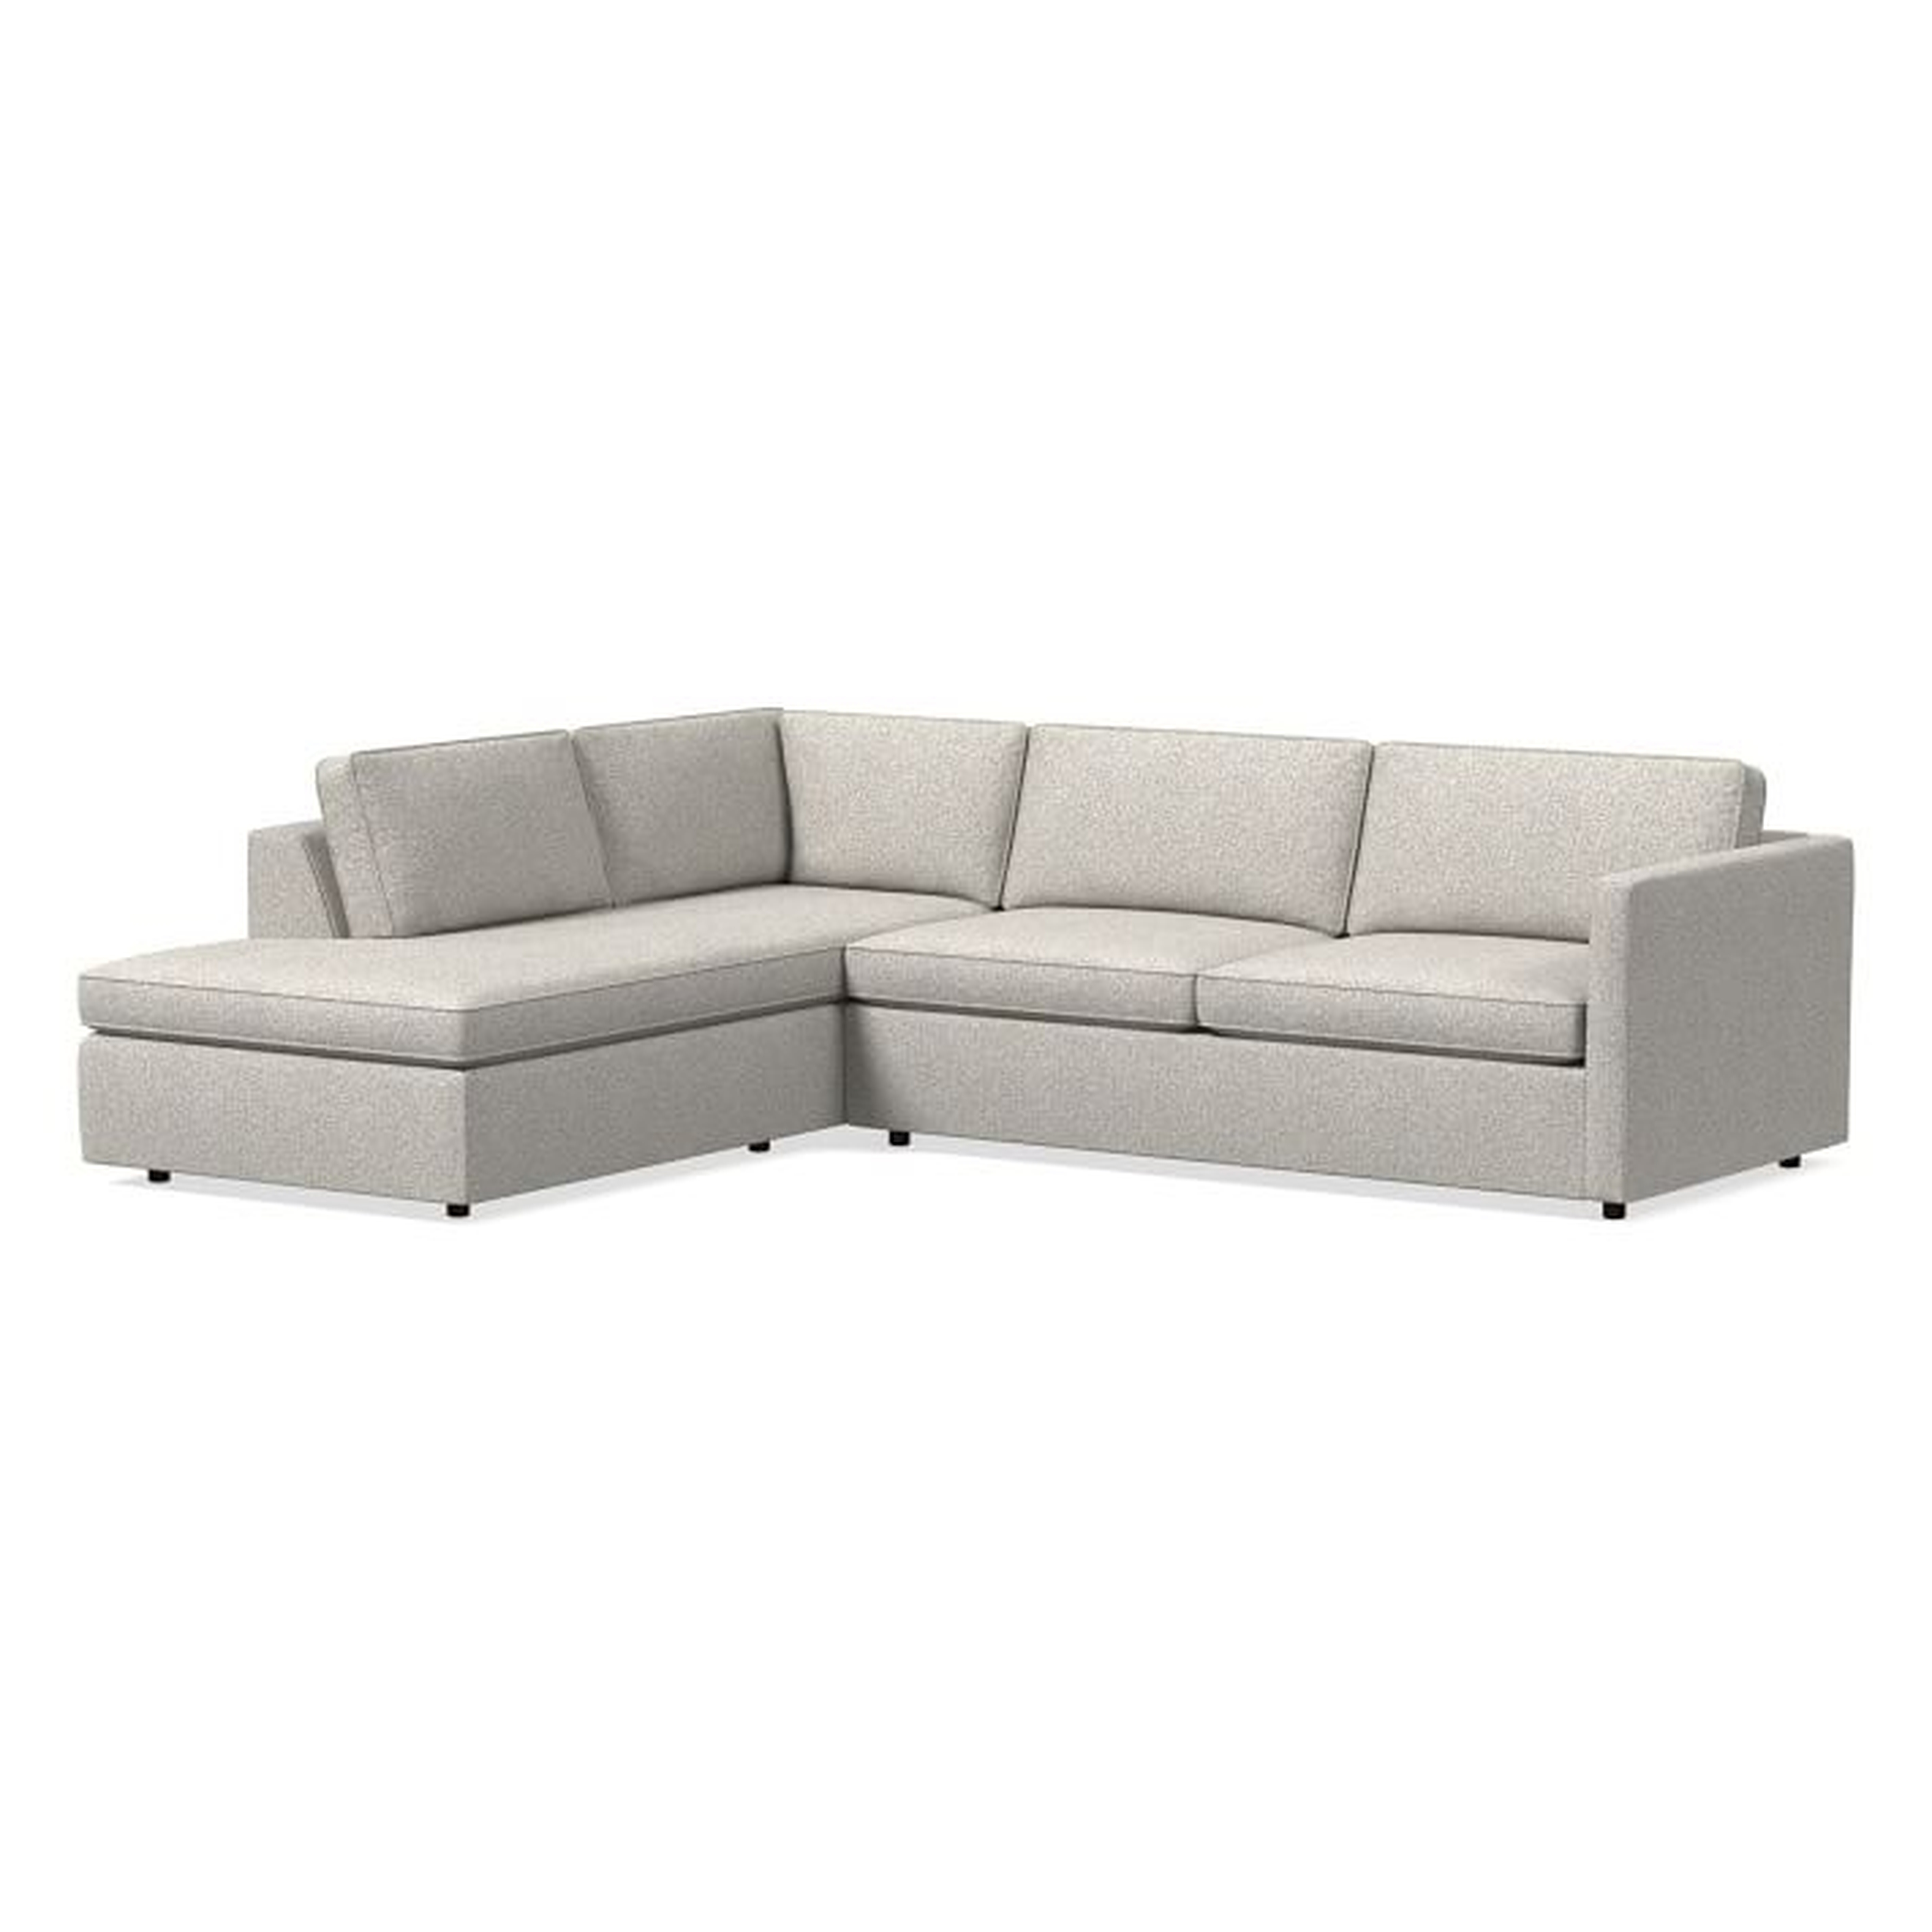 Harris Sectional Set 02: Right Arm Sleeper Sofa, Left Arm Terminal Chaise, Poly, Chenille Tweed, Irongate, - West Elm